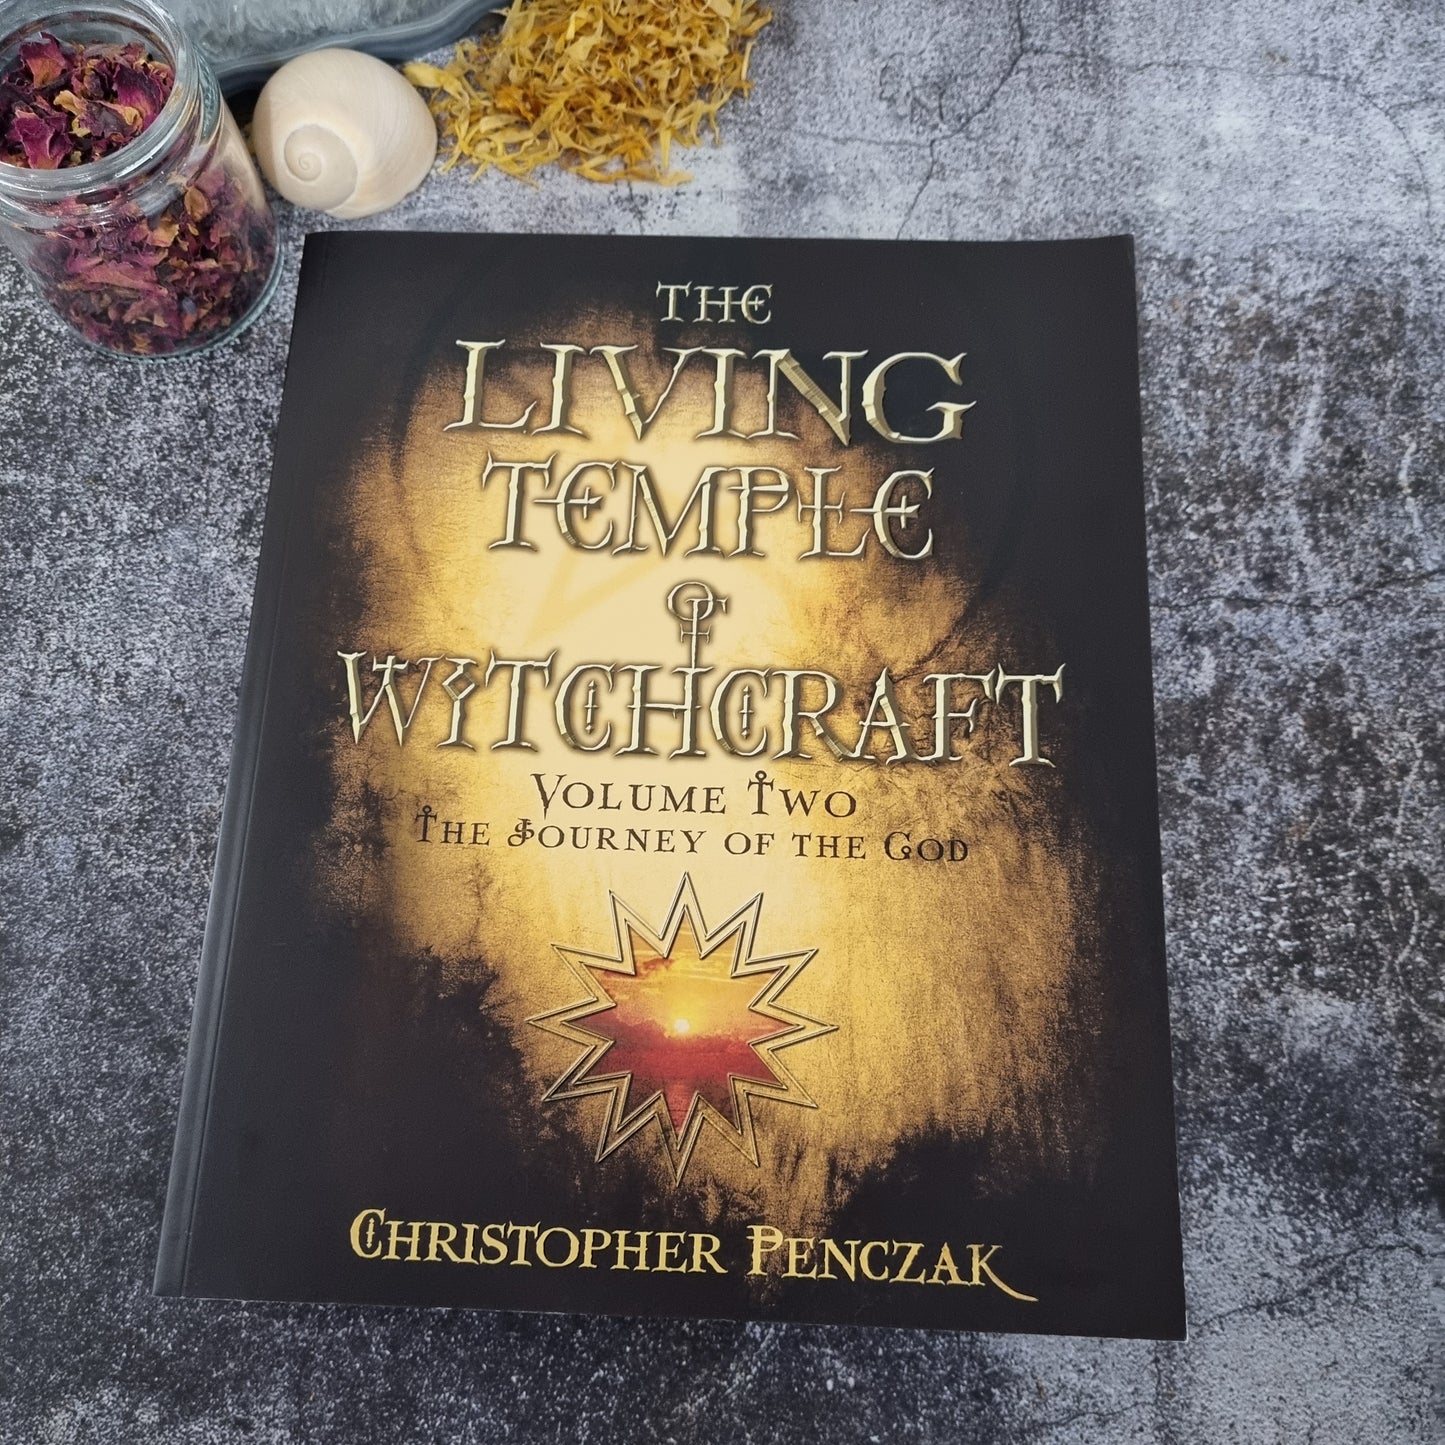 The Living Temple of Witchcraft Vol 2